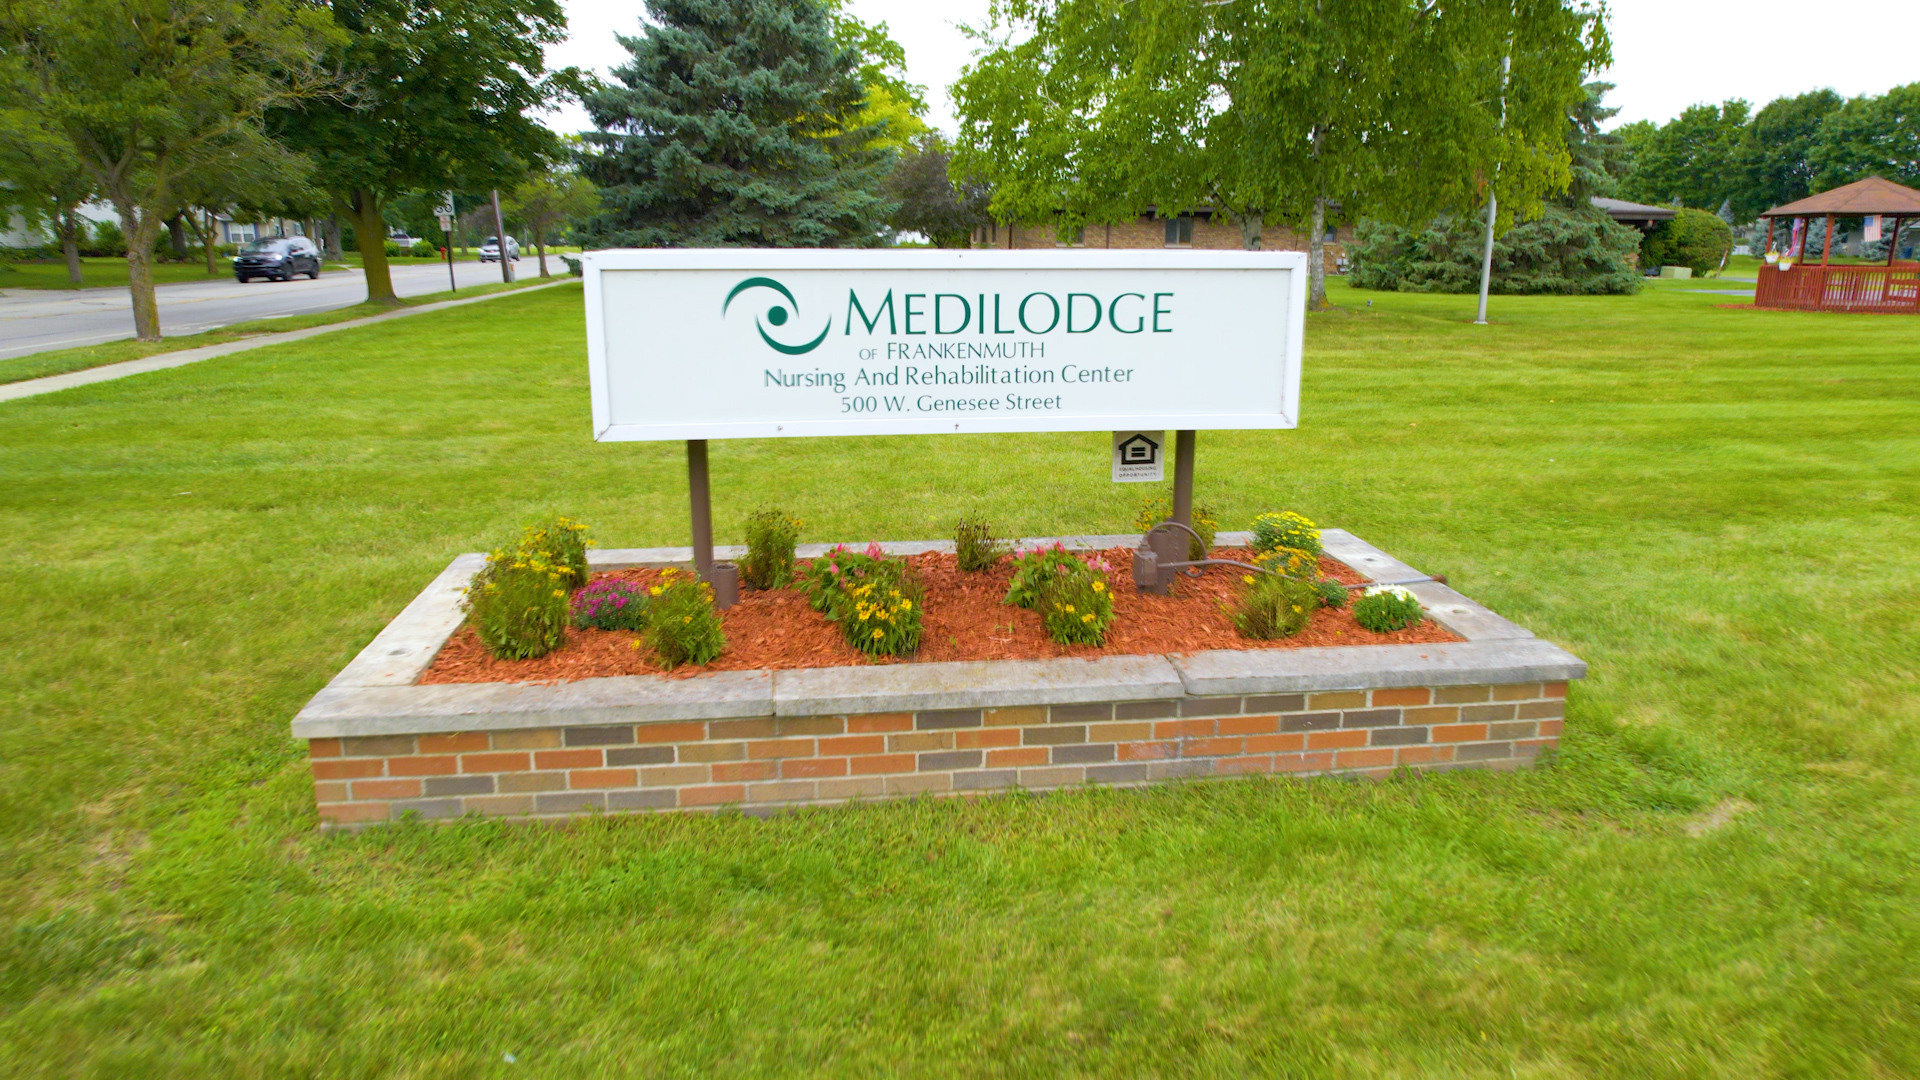 Medilodge of Frankenmuth sign board with trees in the background.